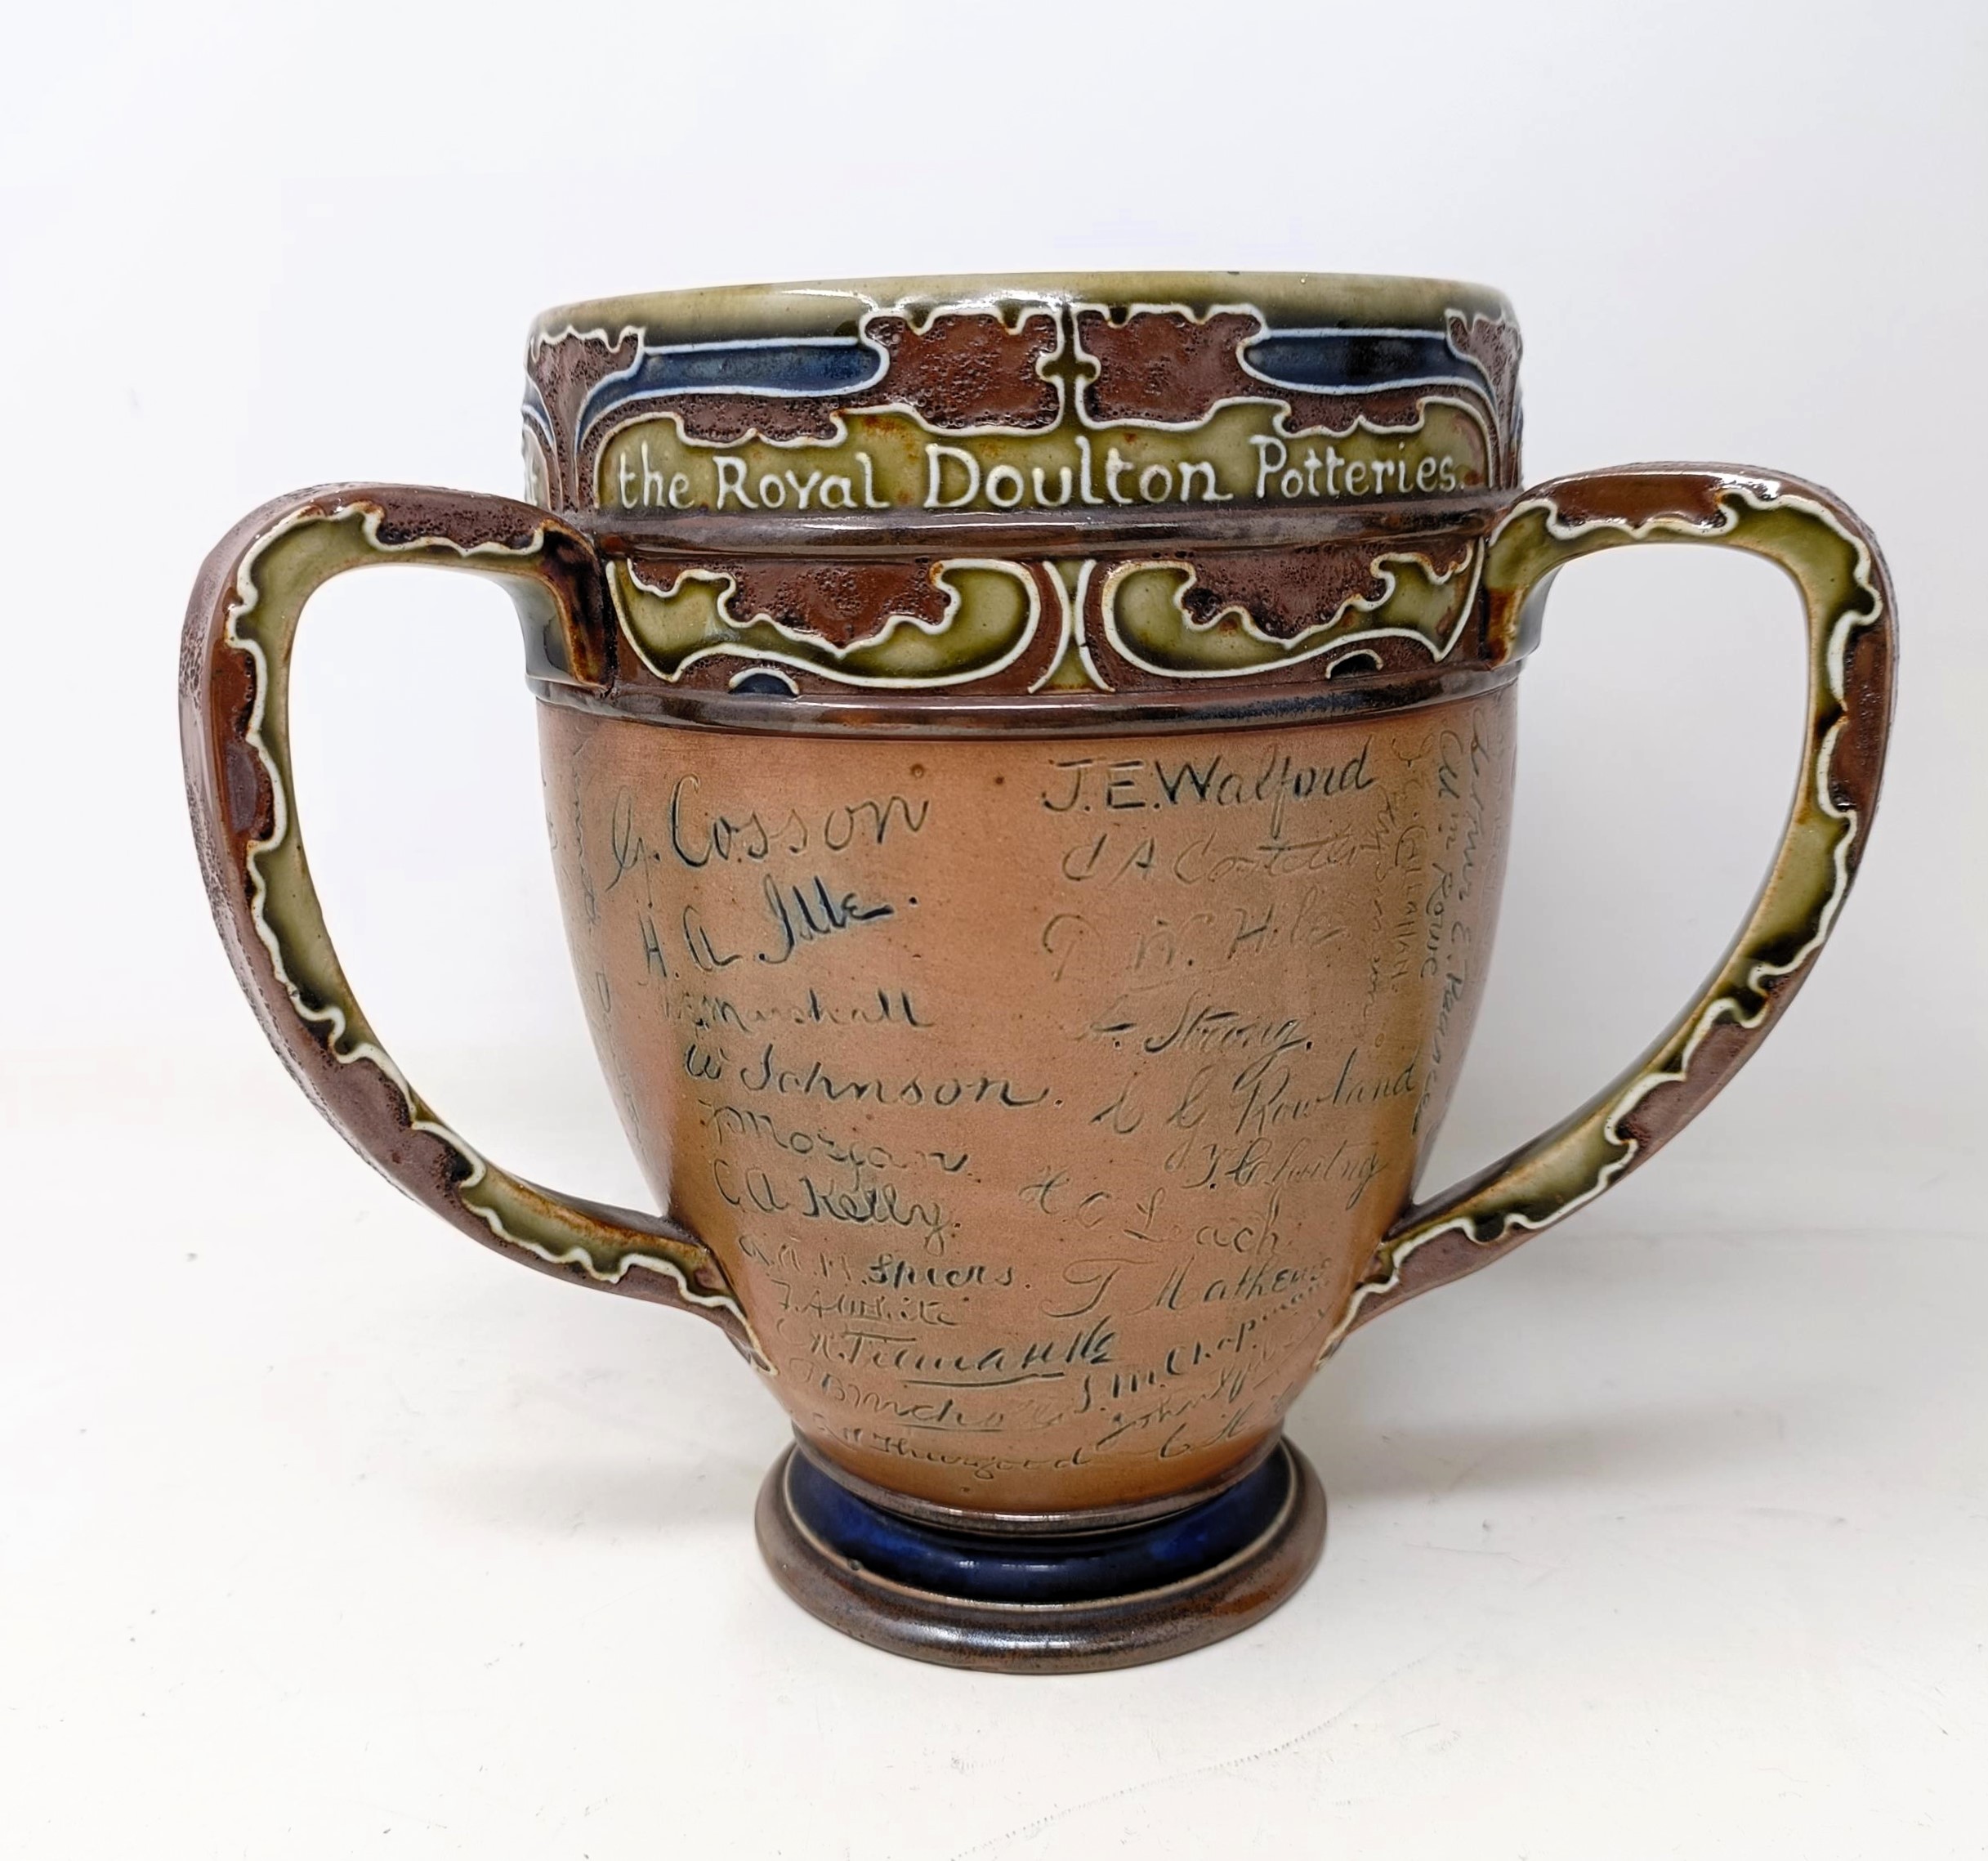 A Royal Doulton three handled retirement loving cup, by Mark Marshall, with various signatures of